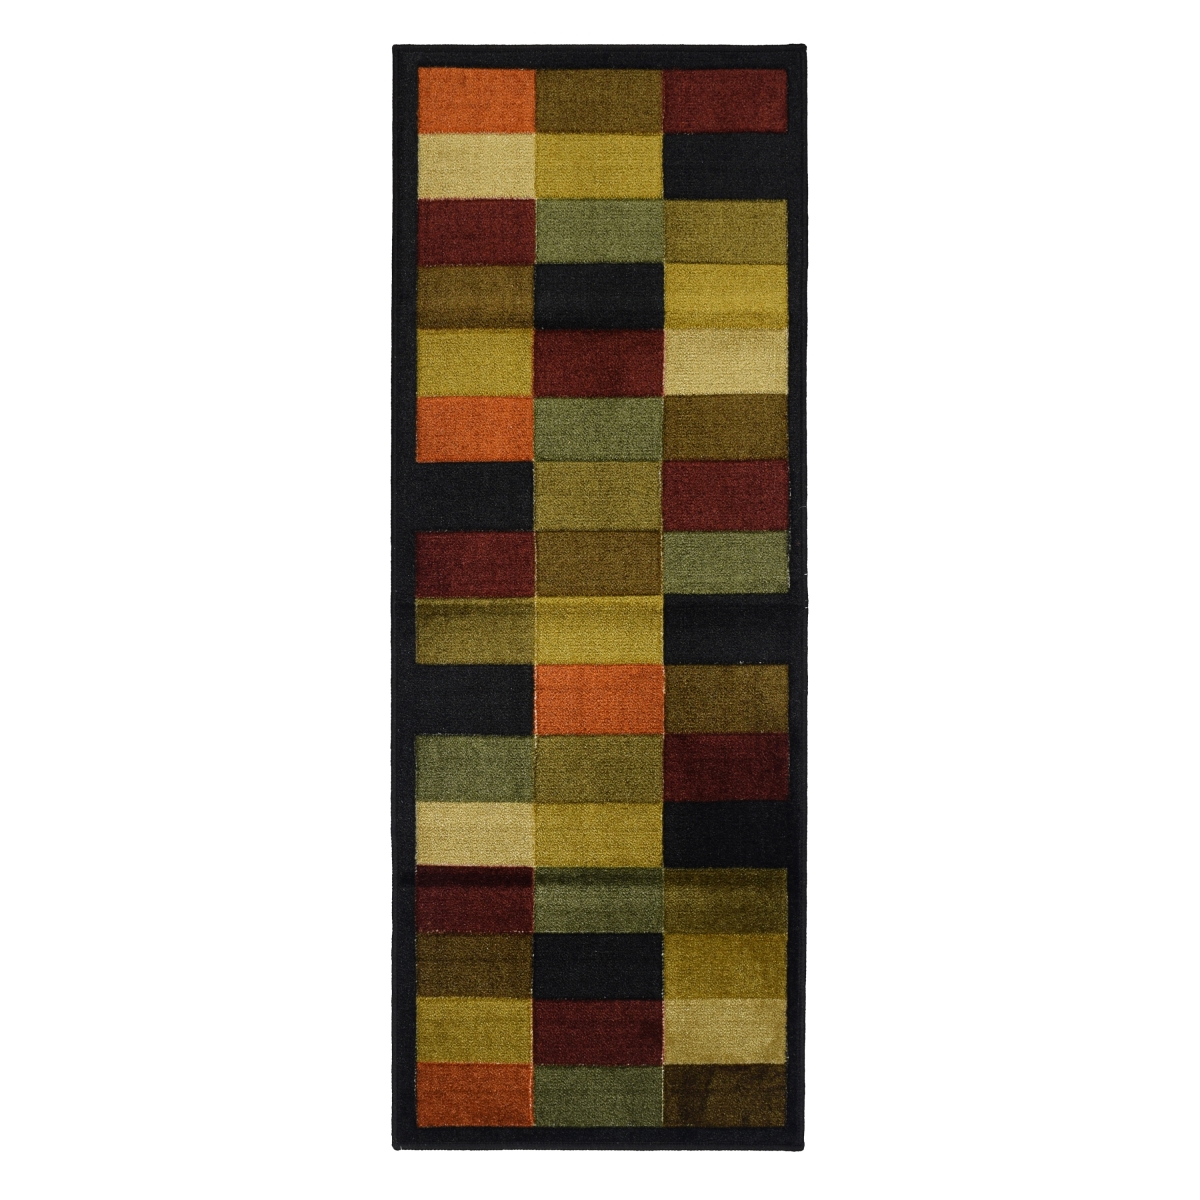 Picture of Madison Industries COLBL-22X59 20 x 59.5 in. Color Blocks Rug Runner, Multi-Color